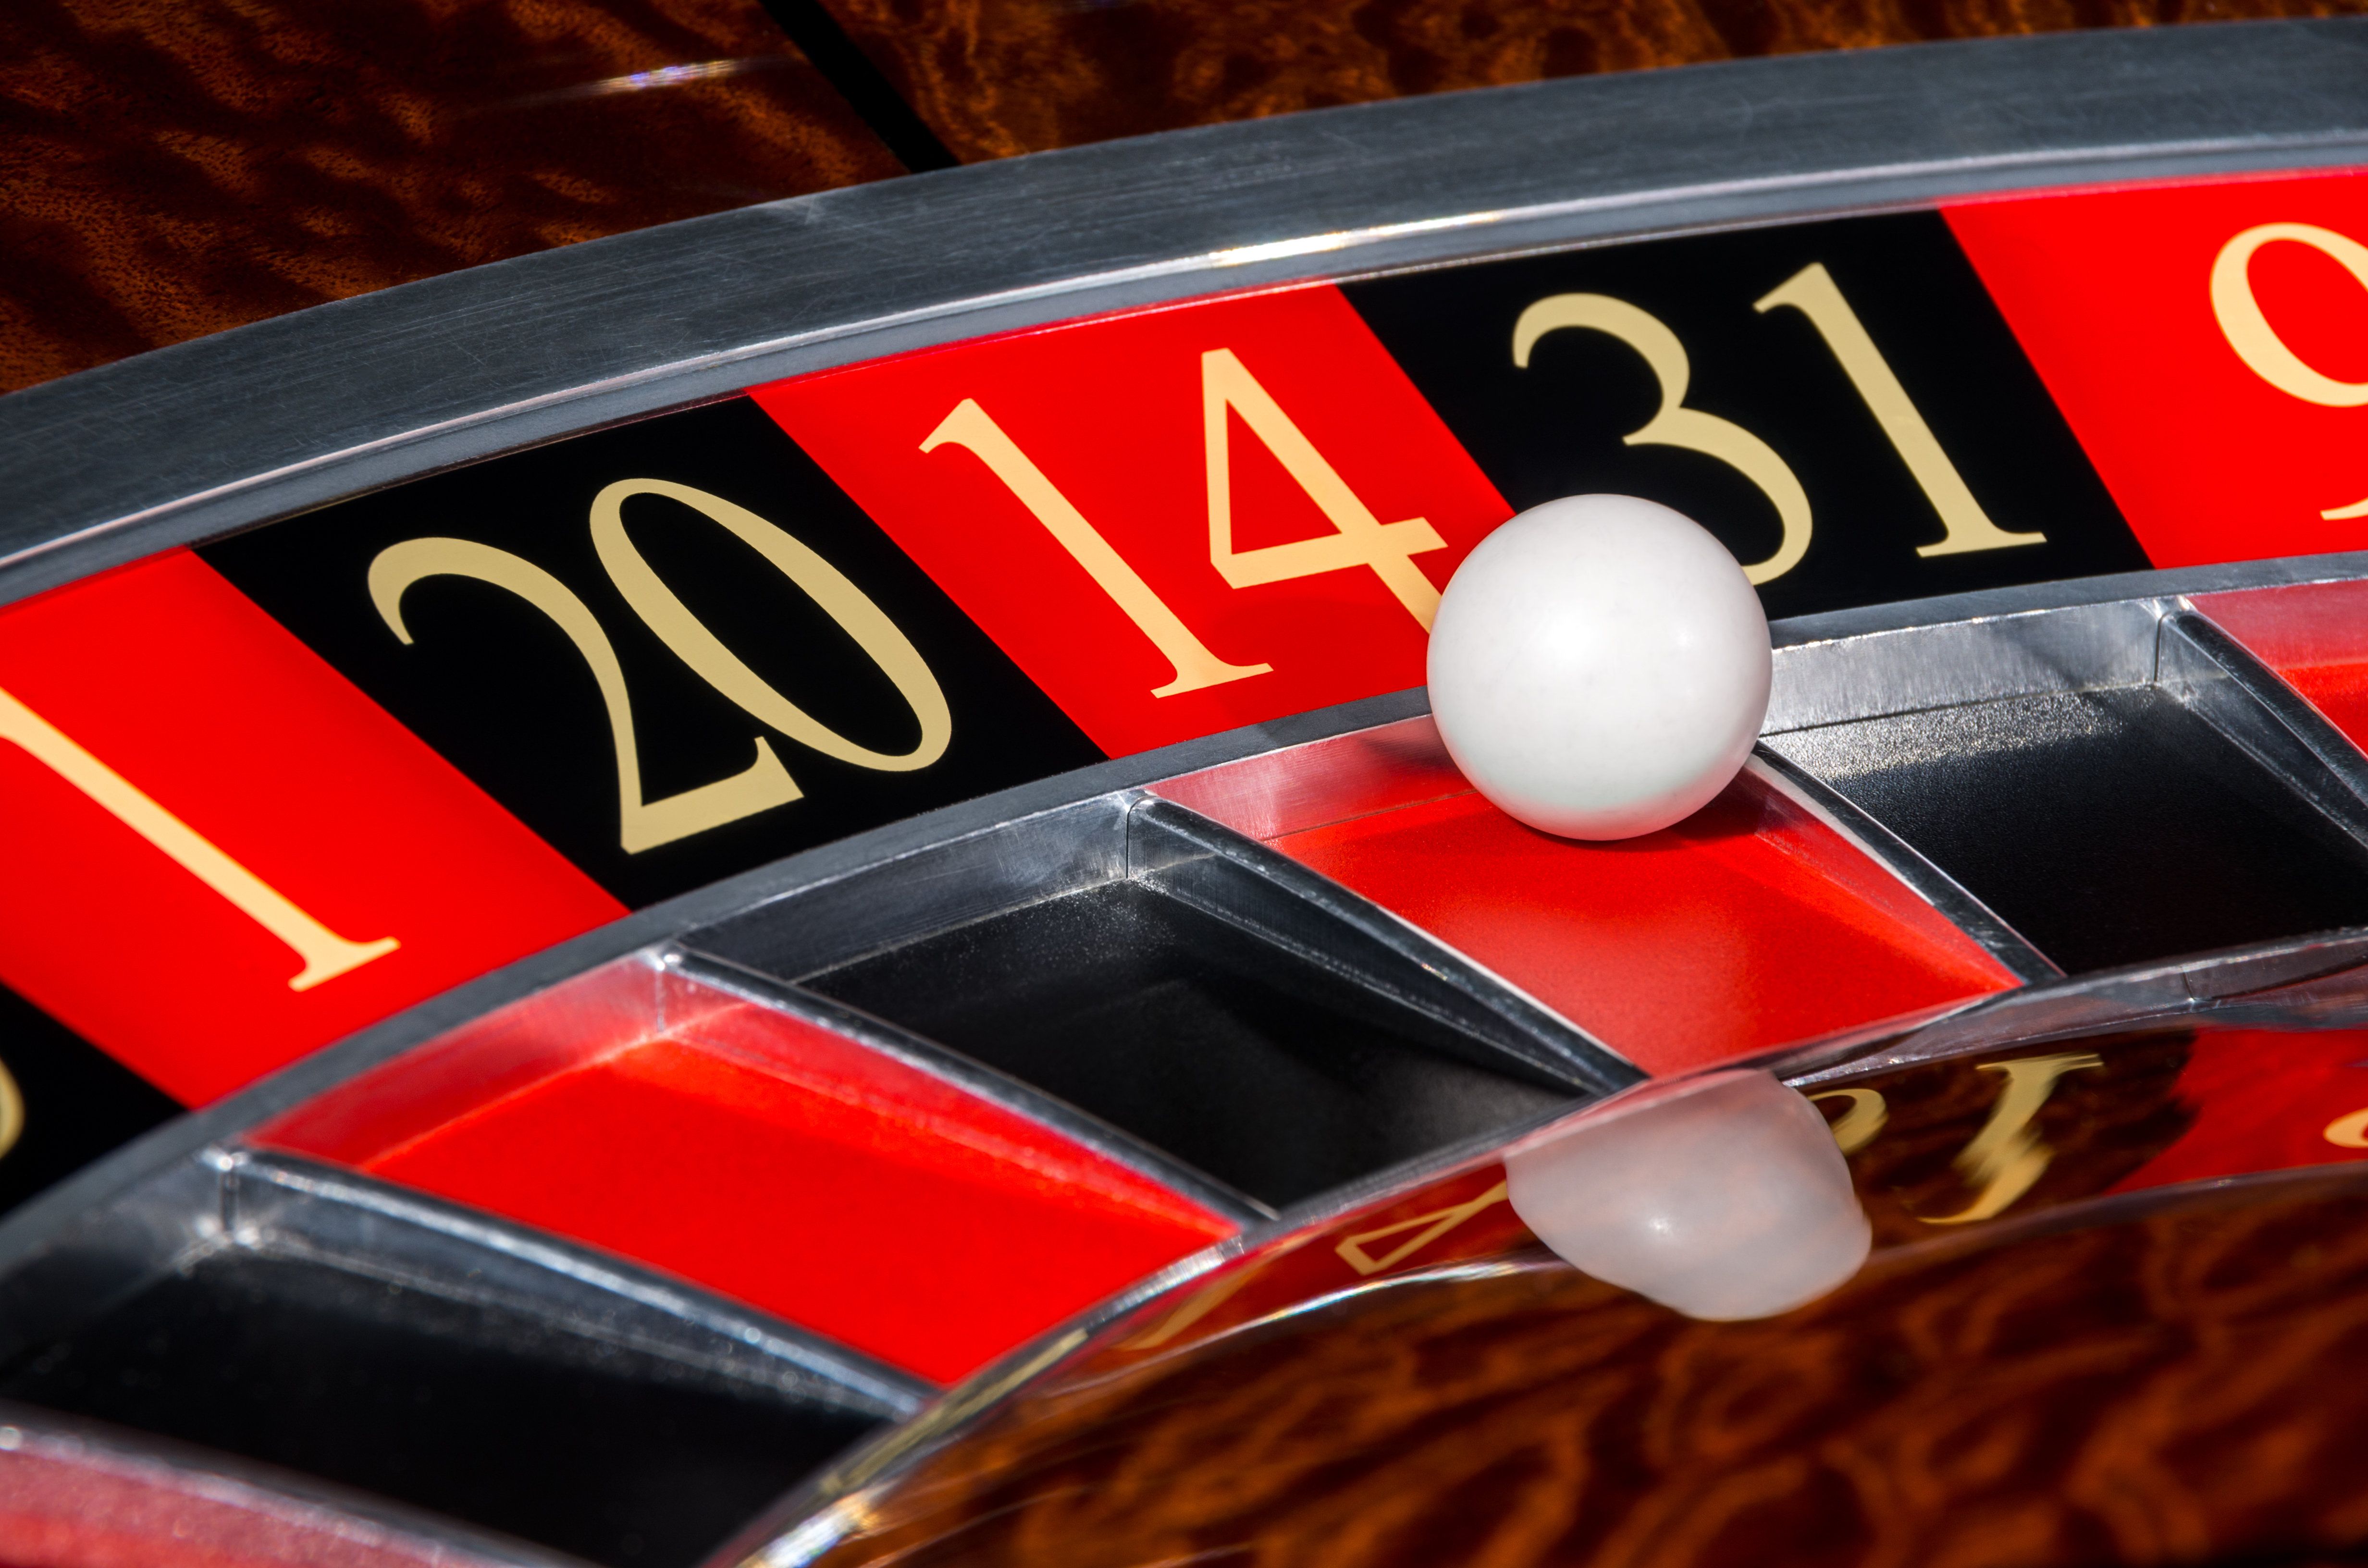 How To Beat Roulette Using A Mobile Phone Gaming